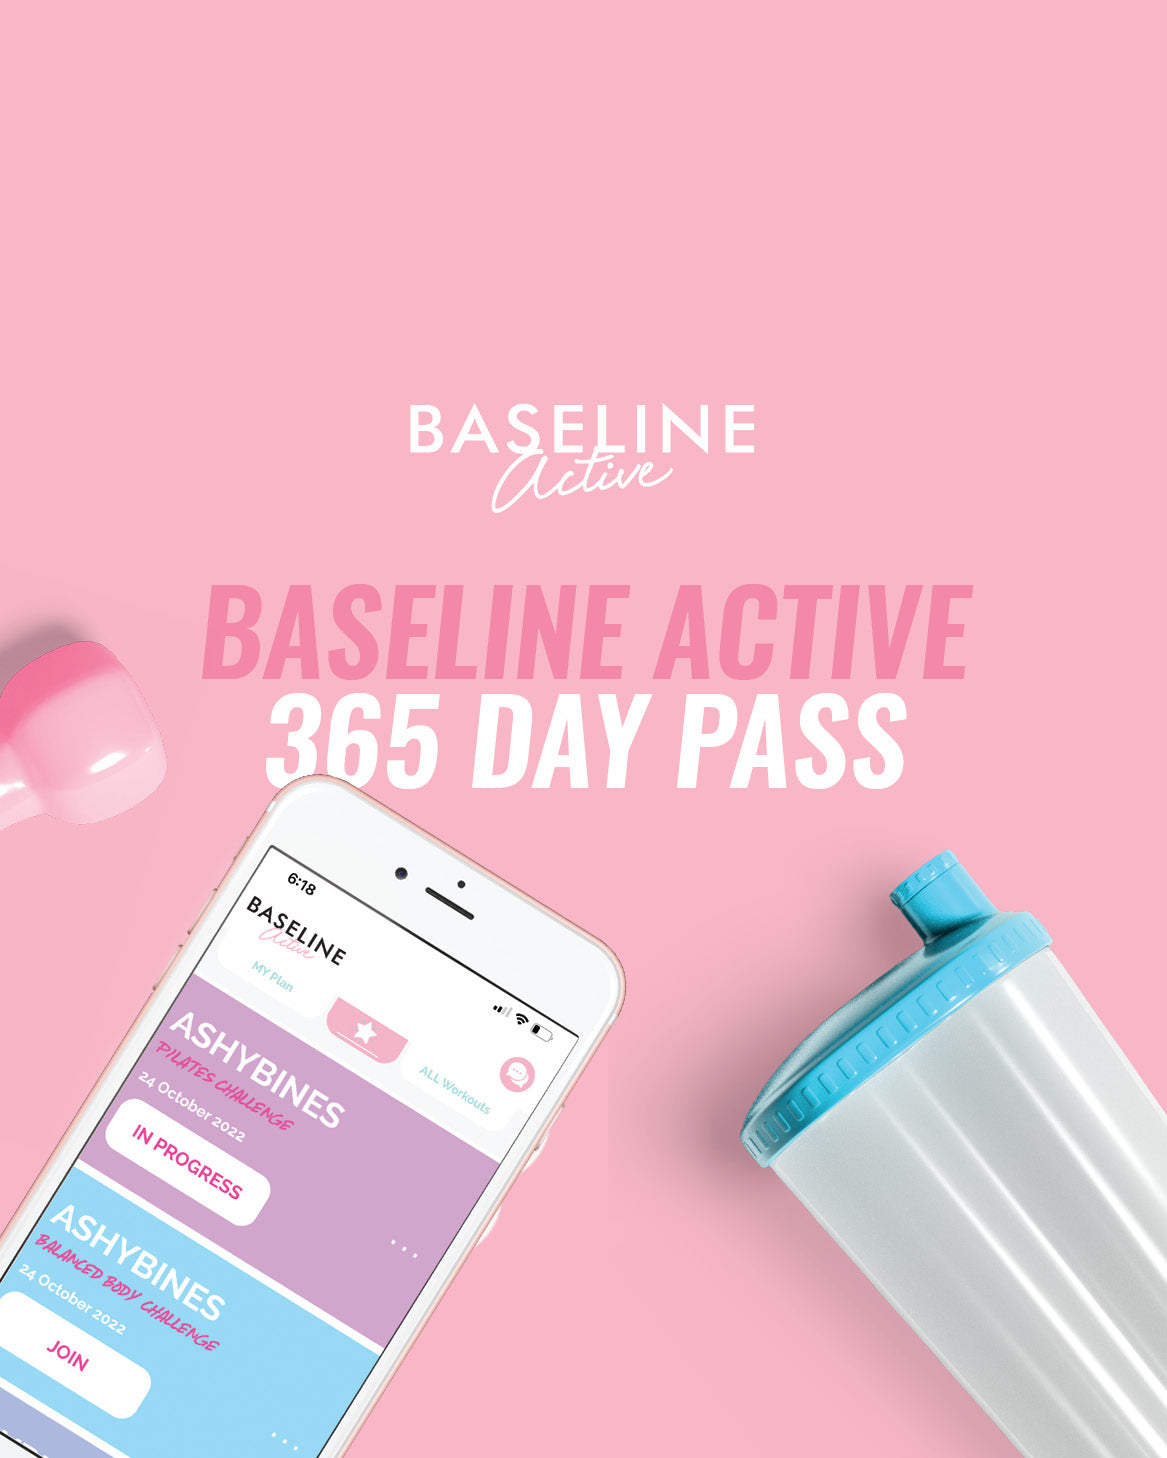 Baseline Active - 365 Day Pass